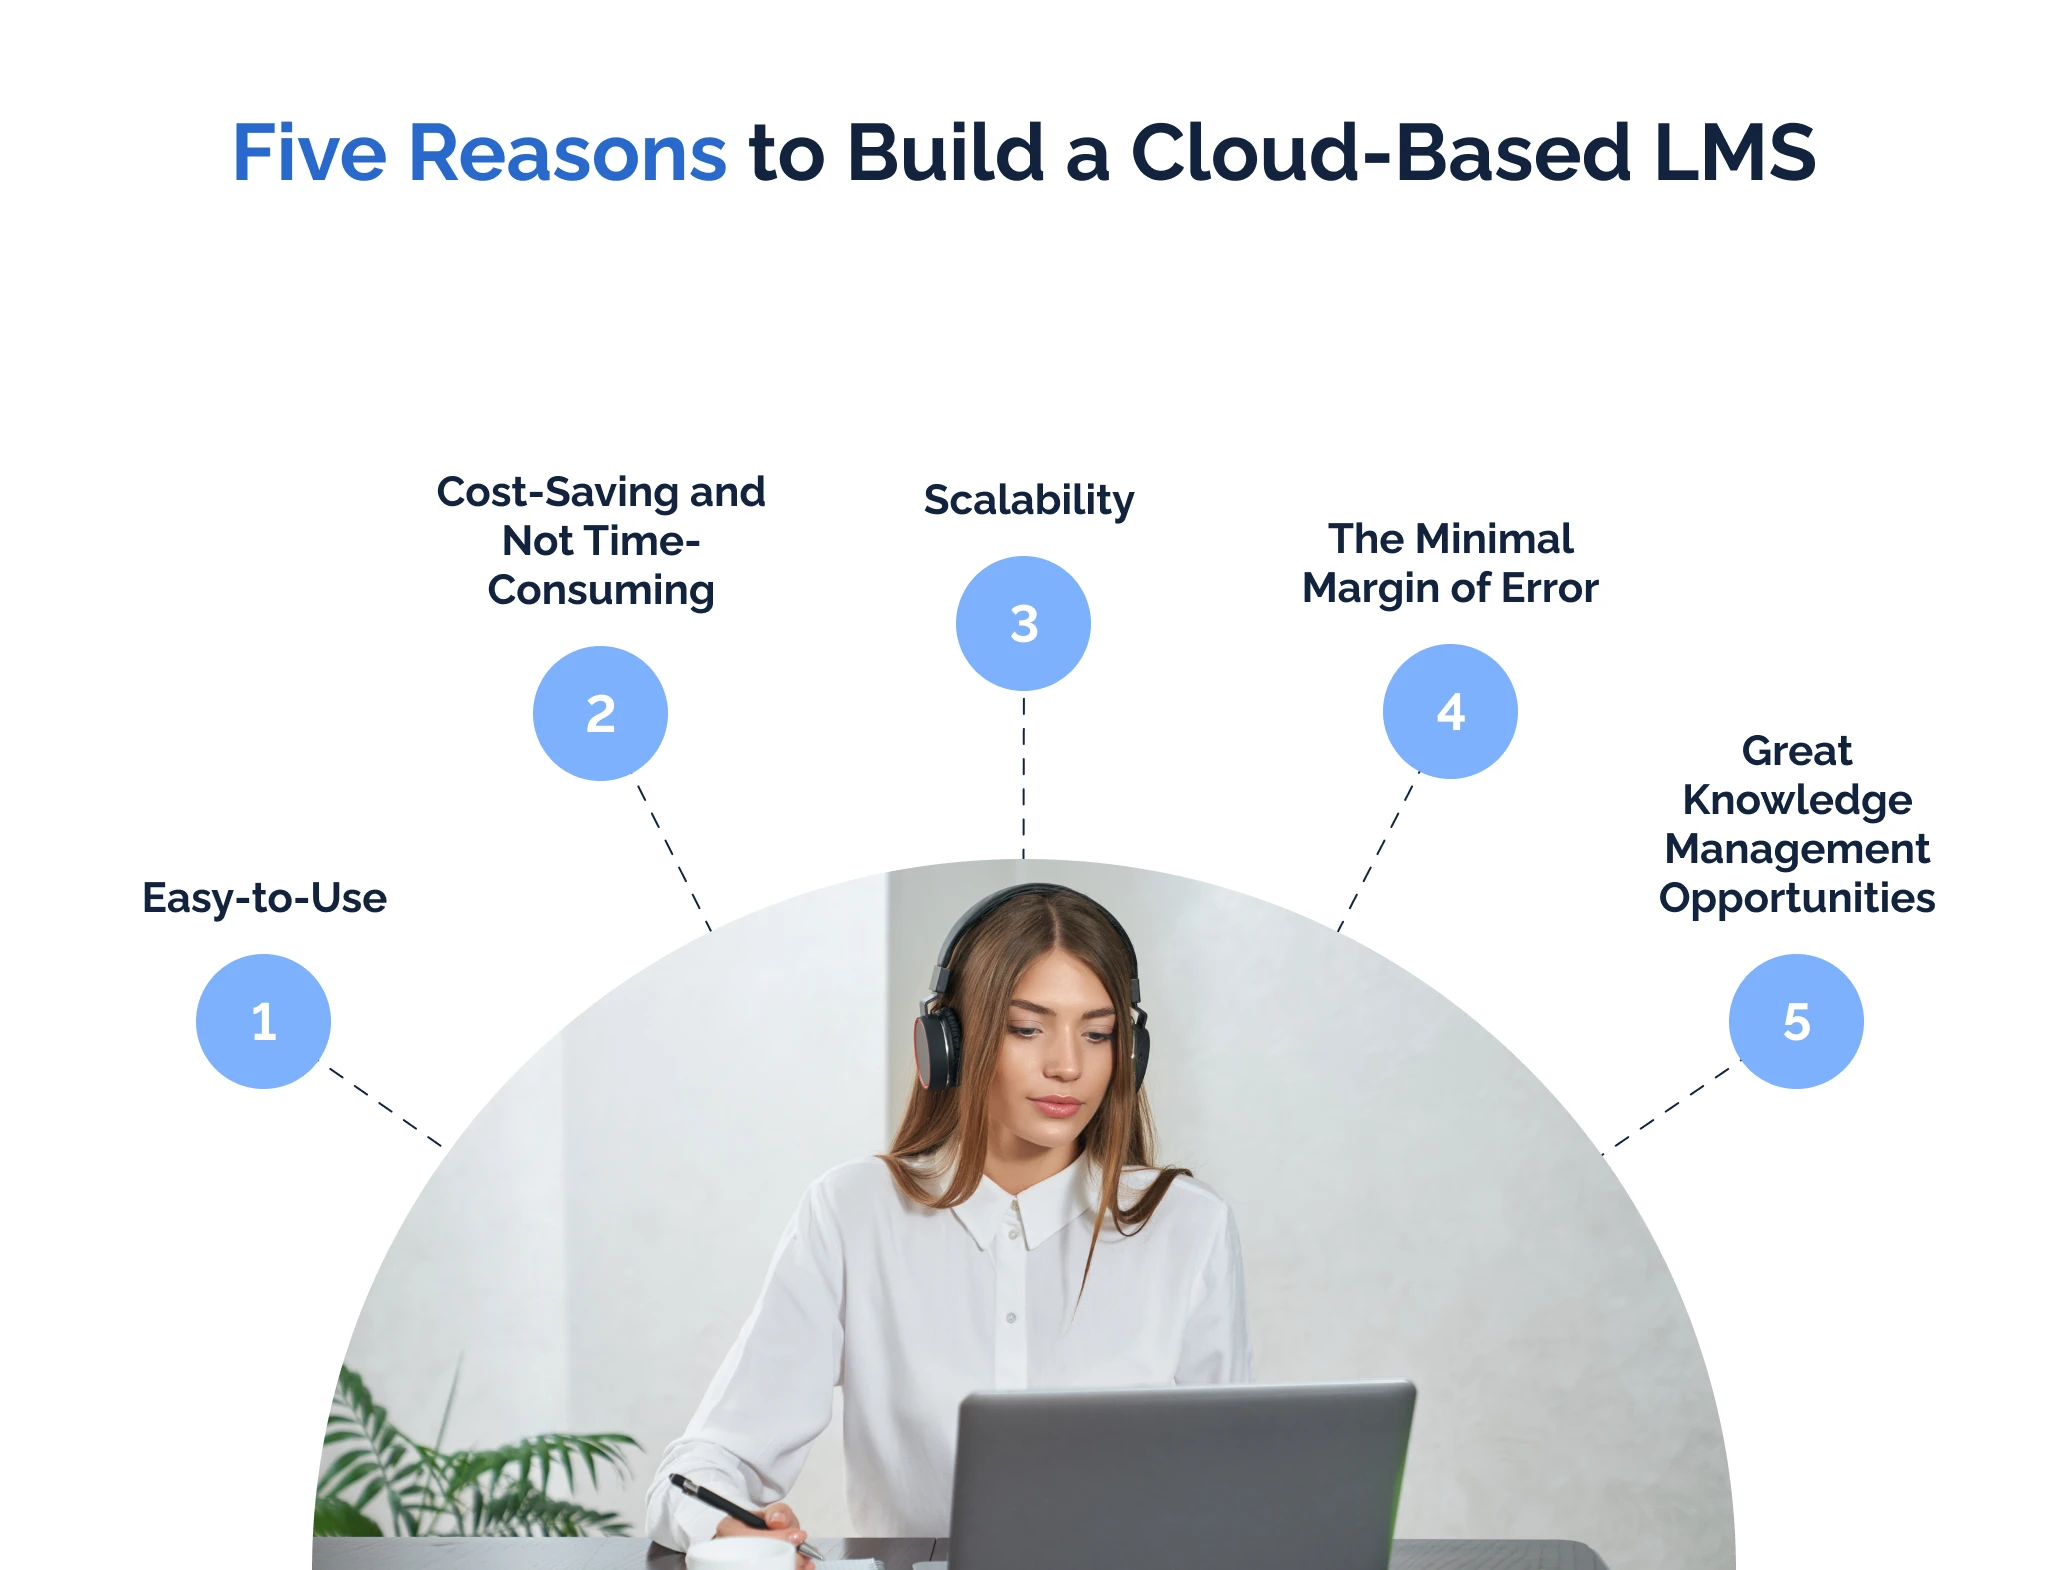 Five reasons to build a cloud-based LMS